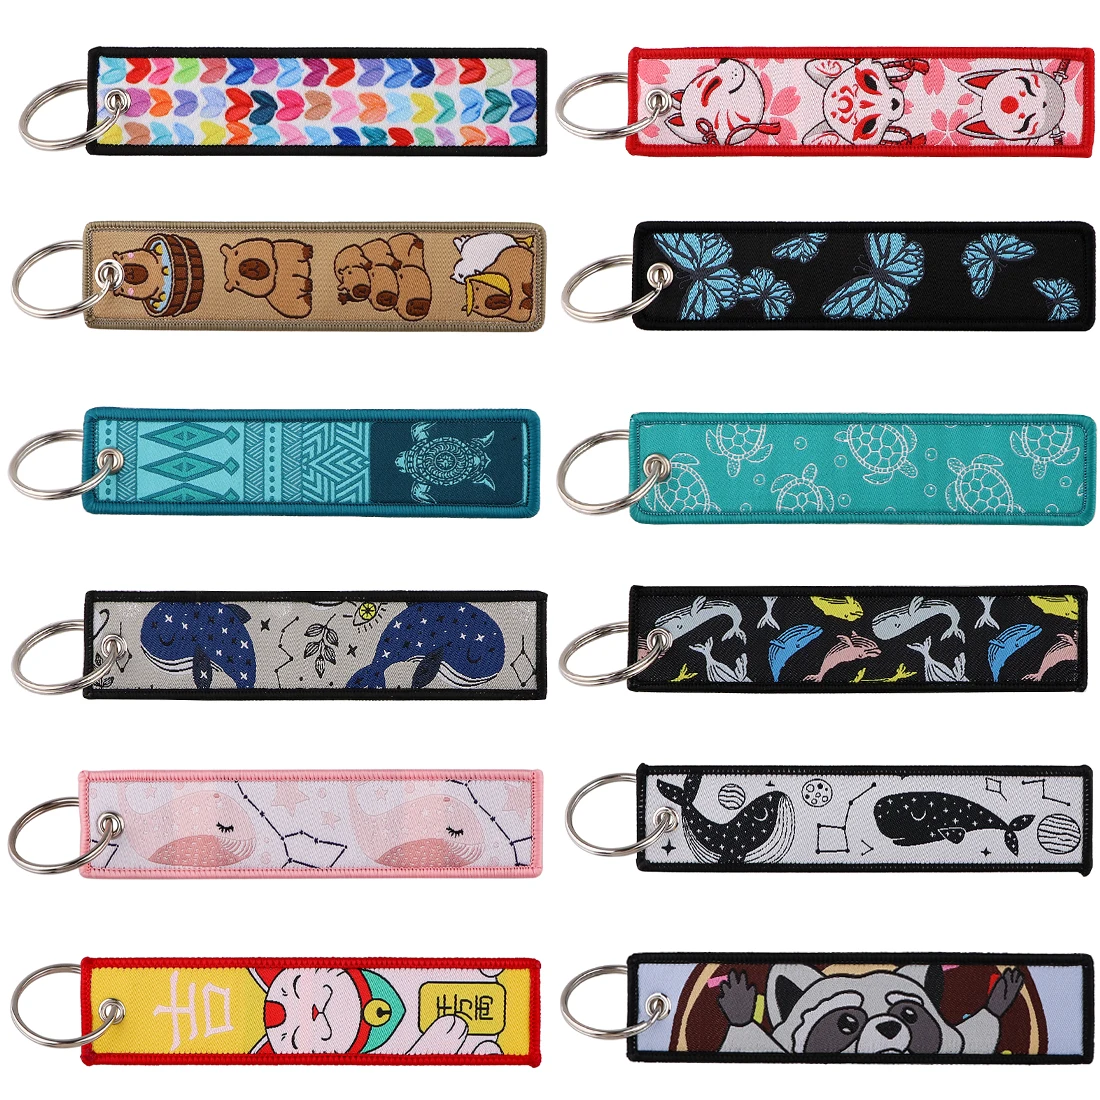 

Colorful Hearts Sakura Fox Jet Tag Whales Embroidery Key Tag Key Holders for Backpacks Cars Decorative Keyrings Gifts 1PCS